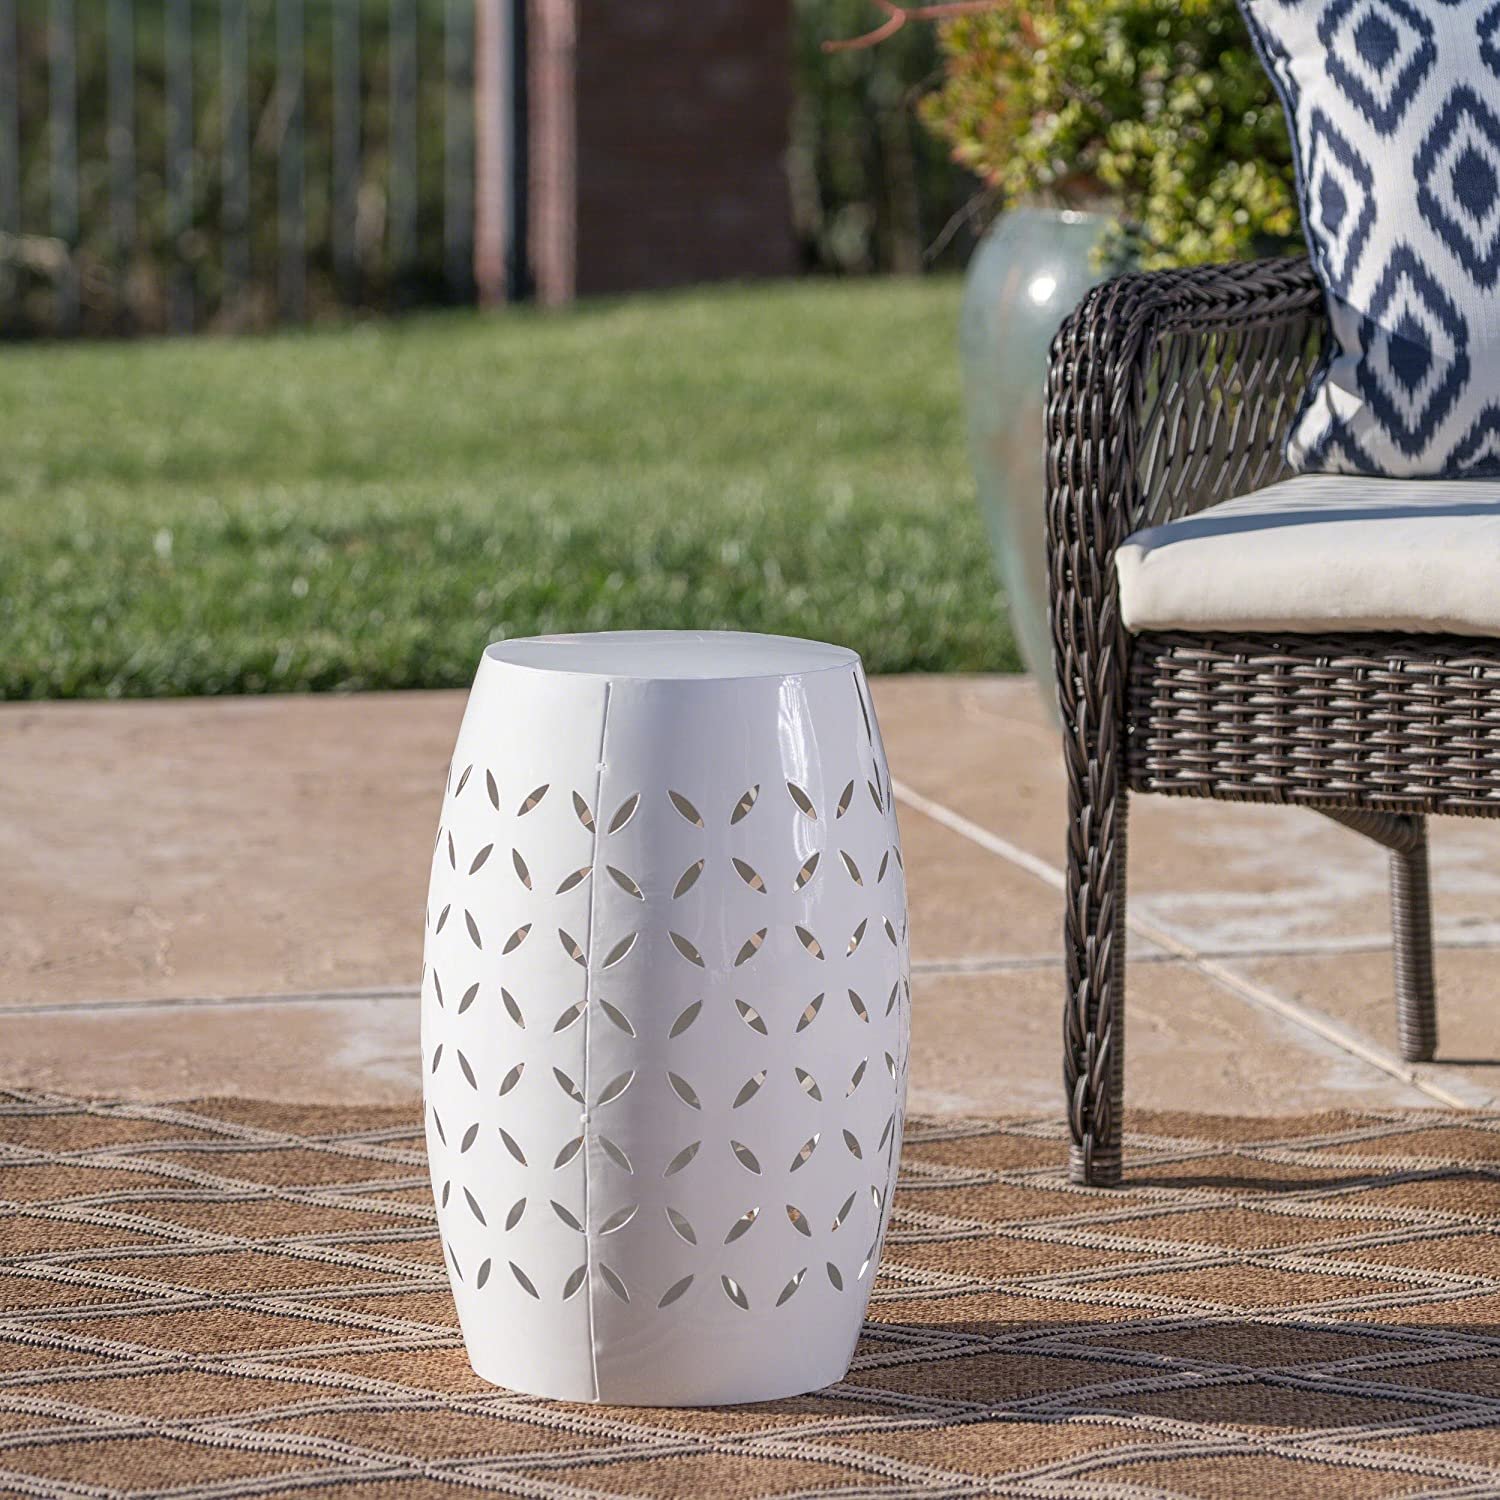 White tin cylindrical side table with patterned cutouts